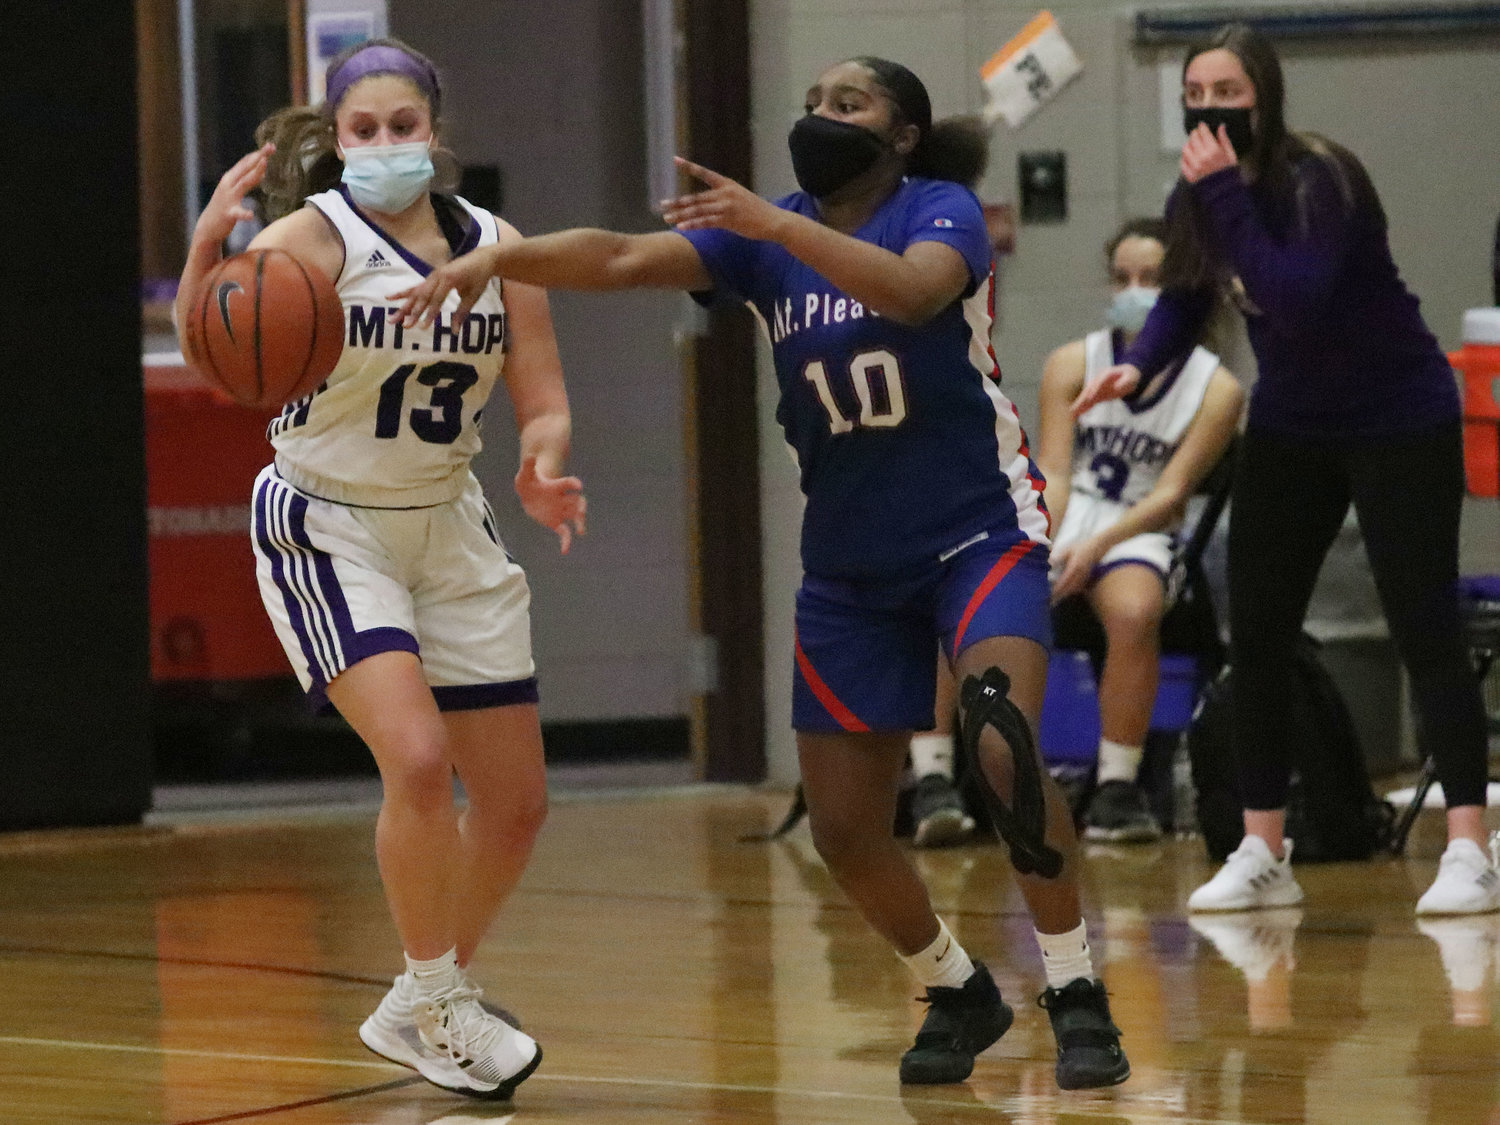 Point guard Abby Razzino makes a steal in the first half.